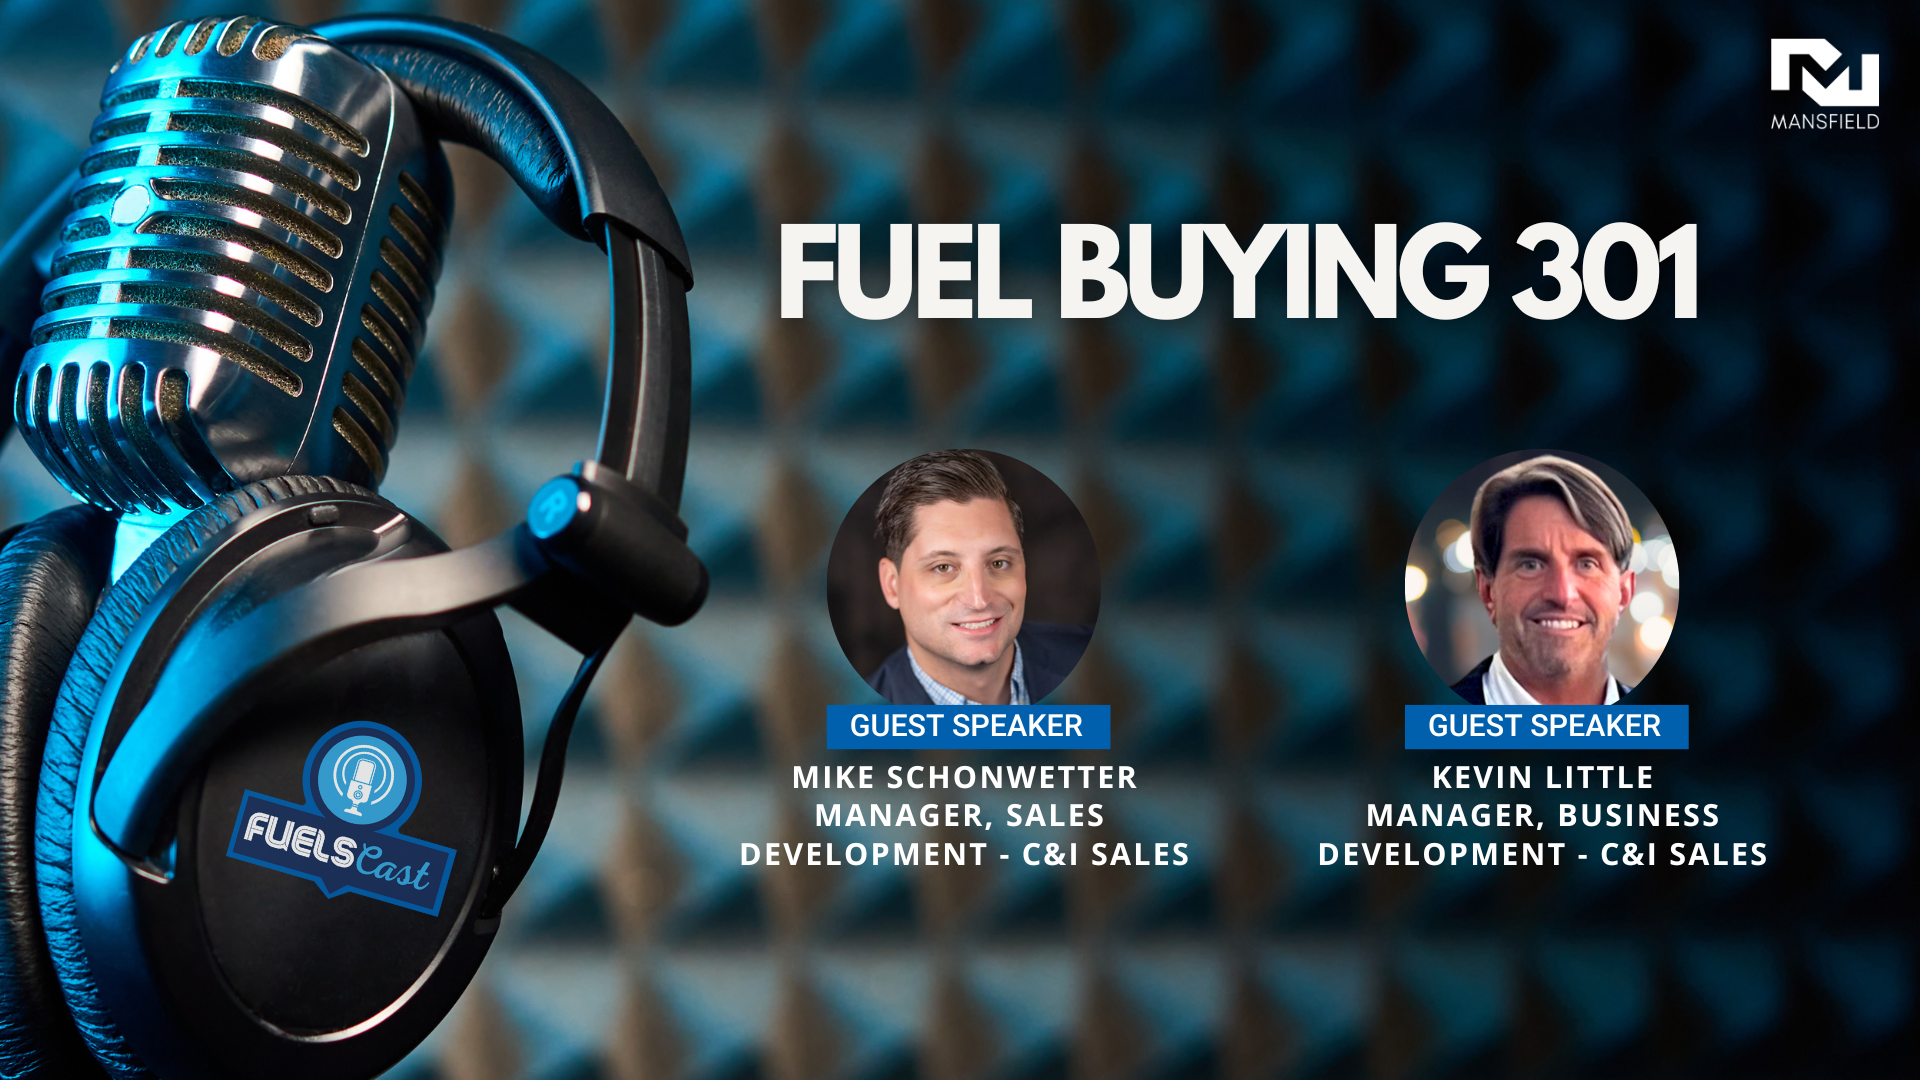 Fuel Buying 301 - Elevate your fuel purchasing expertise with Kevin Little and Mike Schonwetter, our industry experts. Gain advanced insights and strategies to optimize your decision-making process and unlock significant savings when it comes to buying fuel. Level up your fuel buying skills and stay ahead of the game